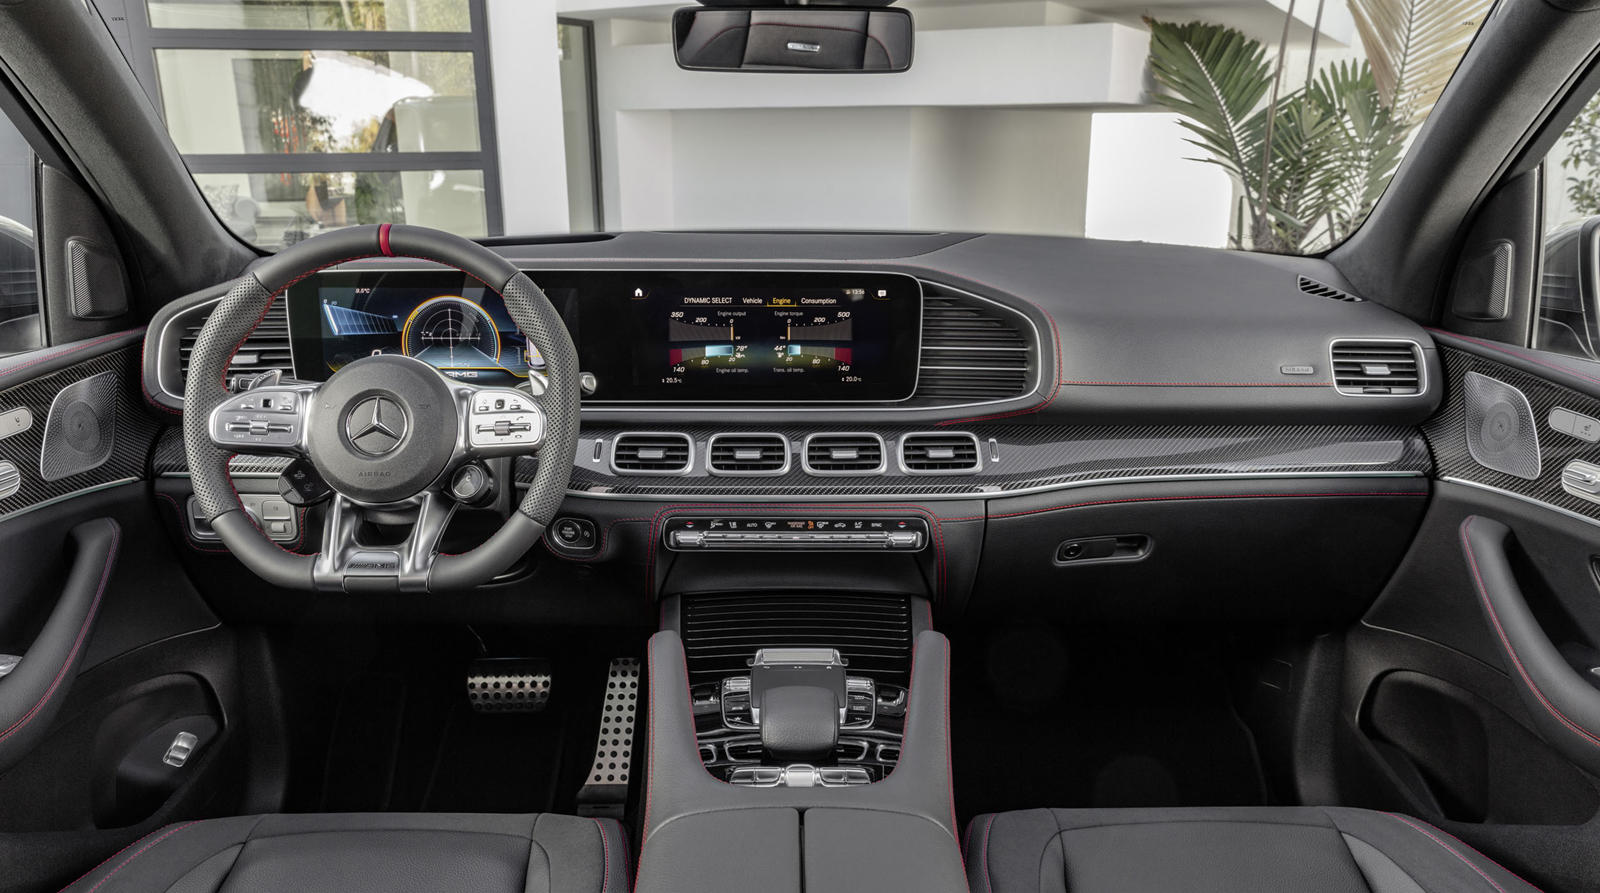 tobacco hydrogen Ready 2022 Mercedes-AMG GLE 53 SUV Interior Dimensions: Seating, Cargo Space &  Trunk Size - Photos | CarBuzz